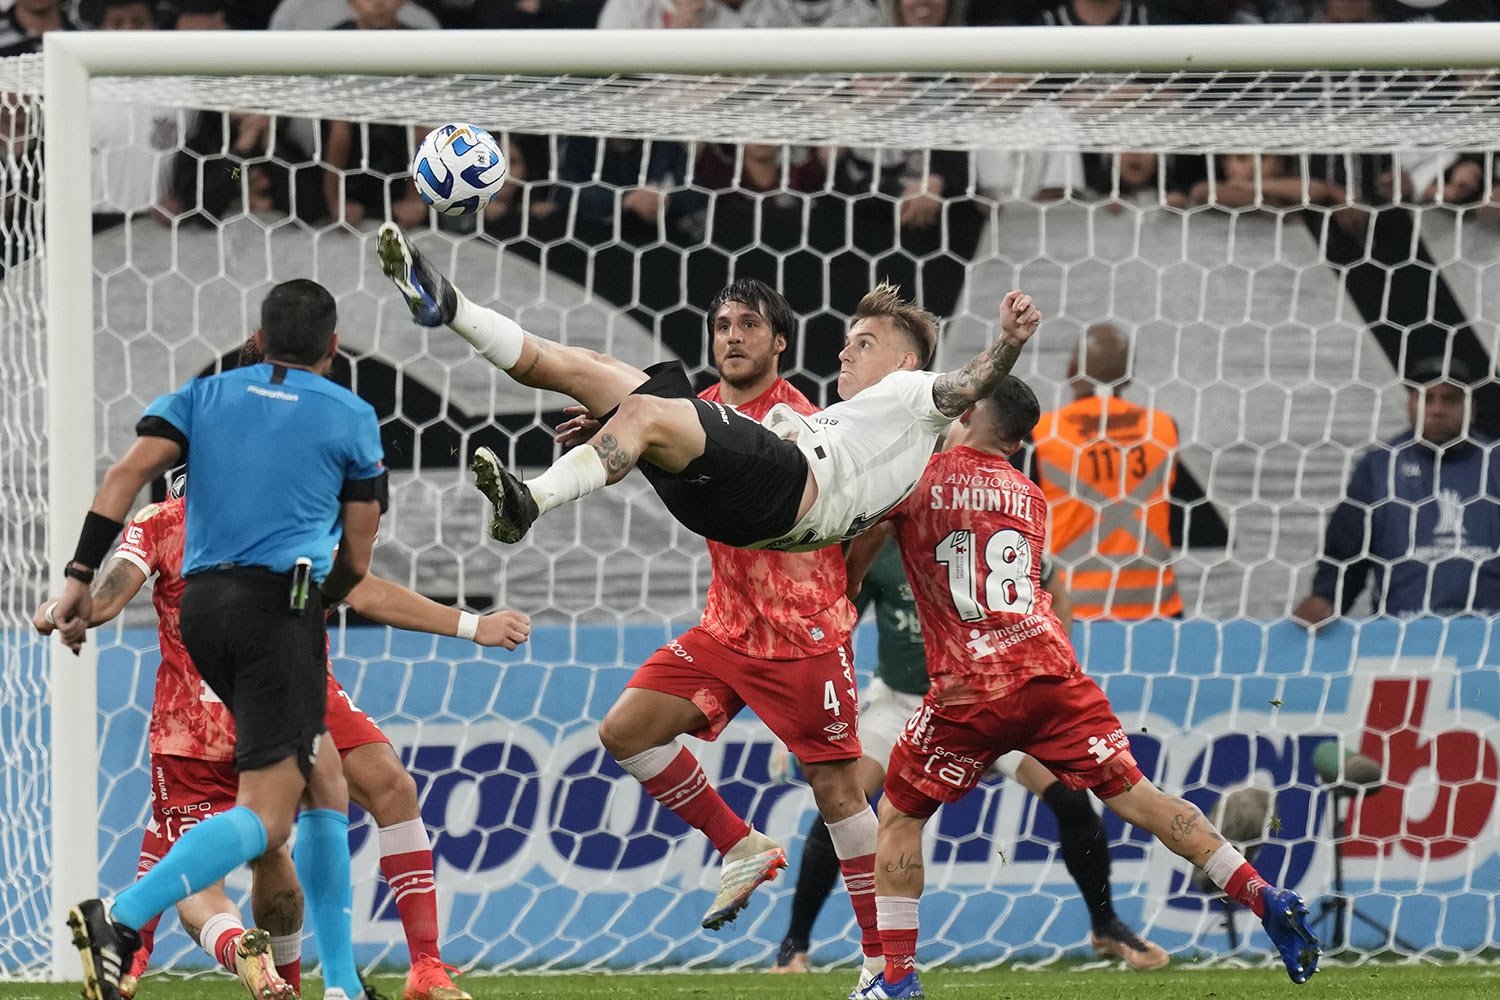  Roger Guedes of Brazil's Corinthians does a bicycle kick at a Copa Libertadores soccer match against Argentina's Argentinos Juniors in Sao Paulo, Brazil, April 19, 2023. (AP Photo/Andre Penner) 